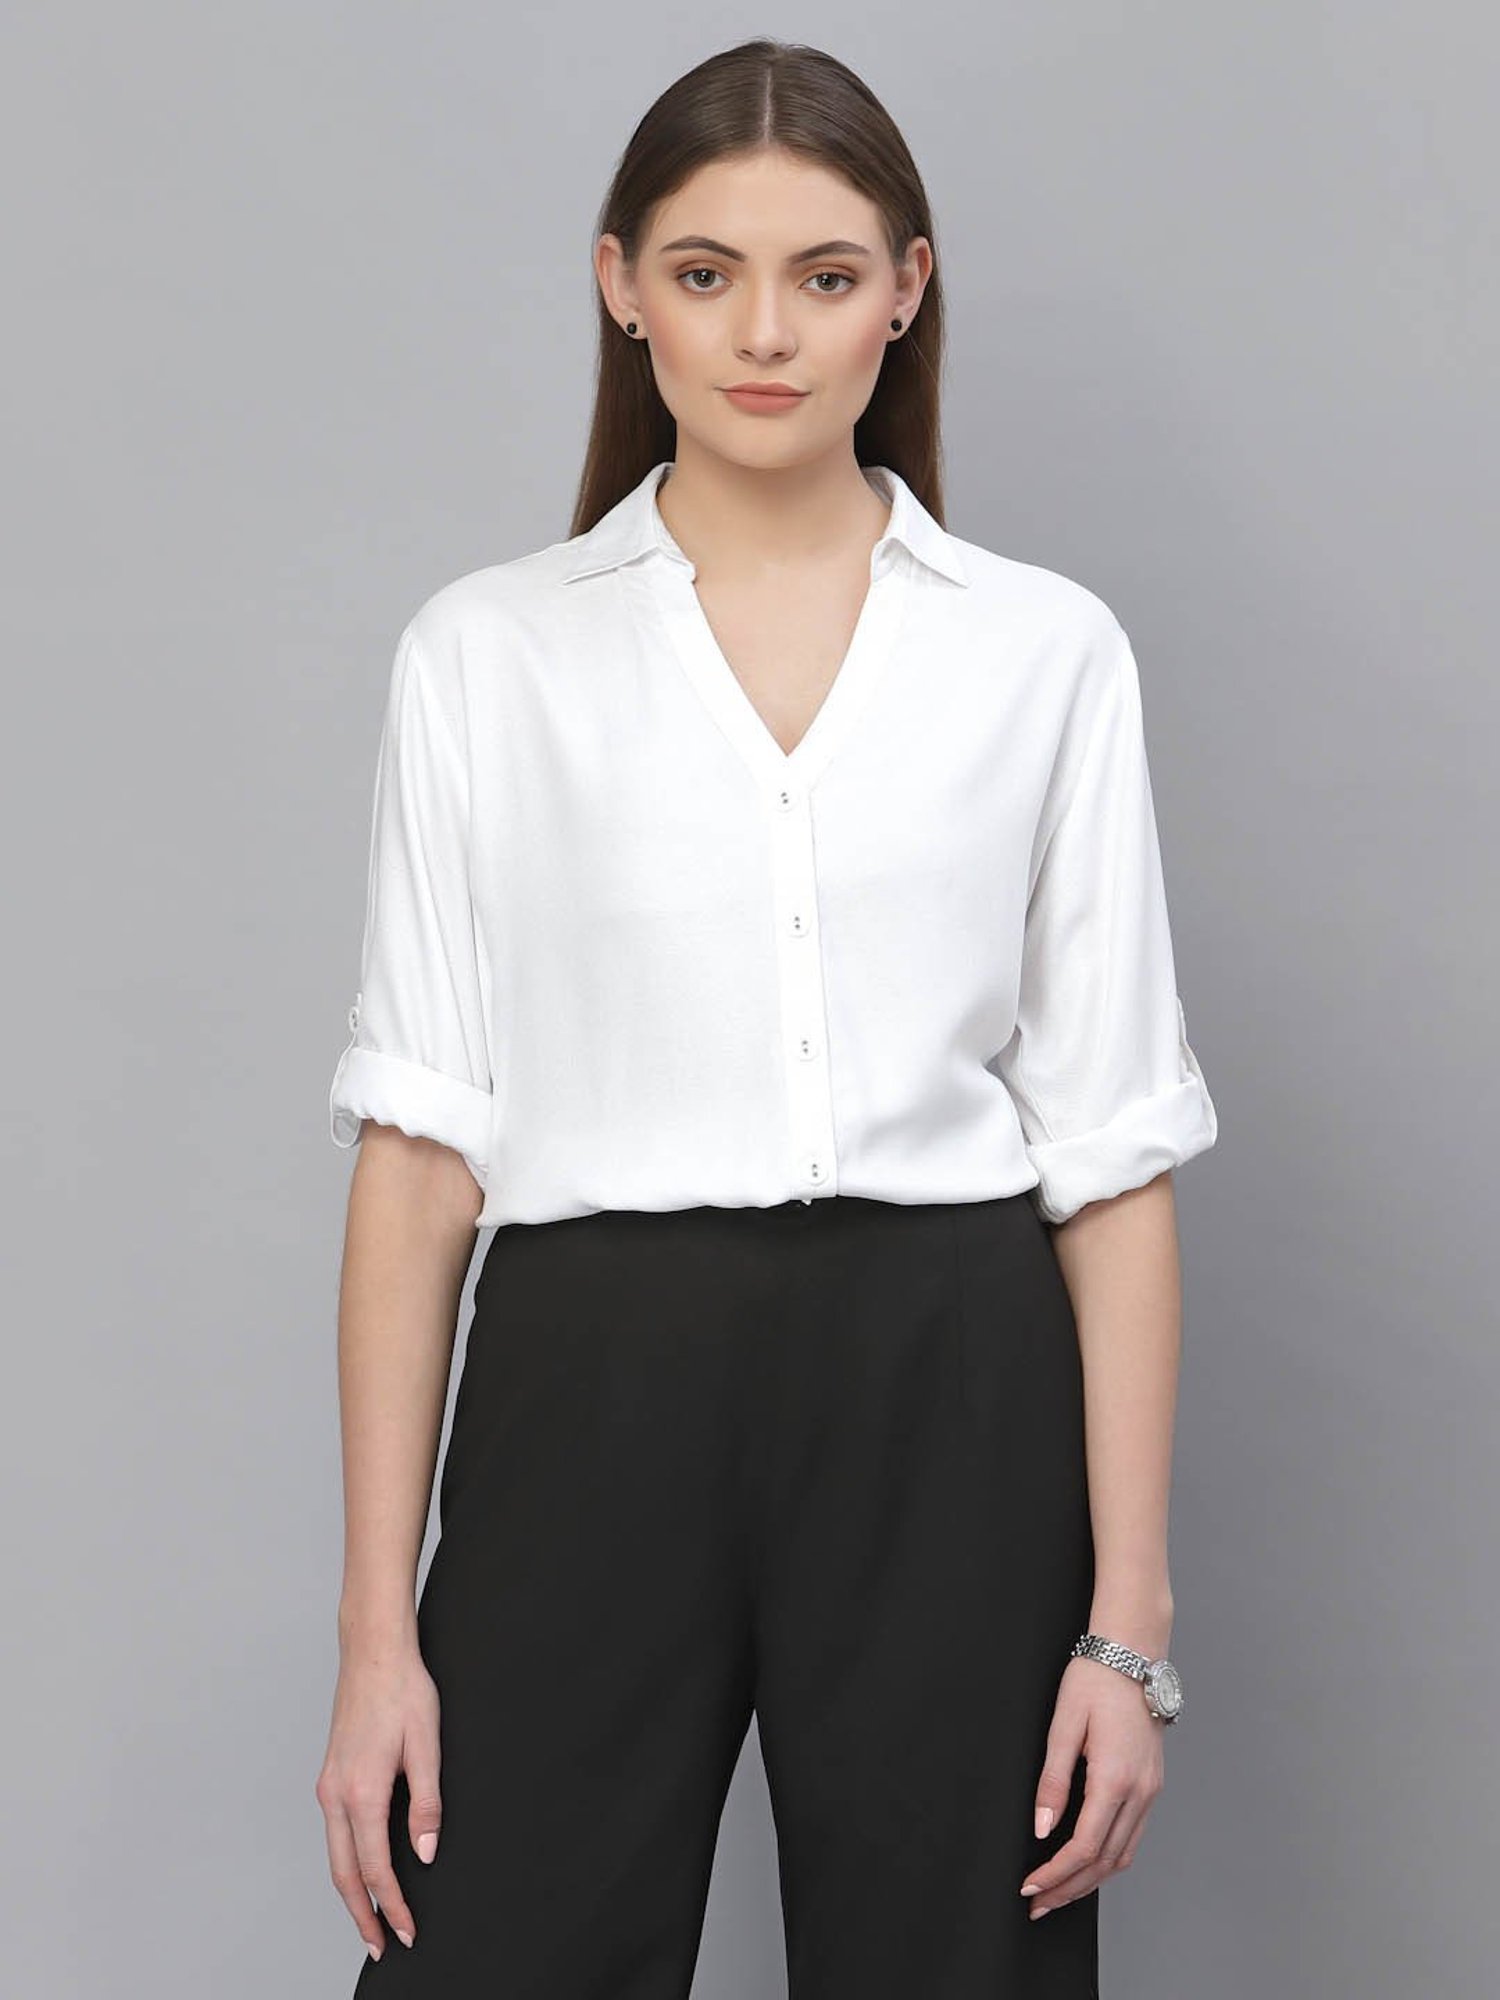 Buy Style Quotient Women Black and White Stripe Polyester Regular Semi  Formal Shirt online